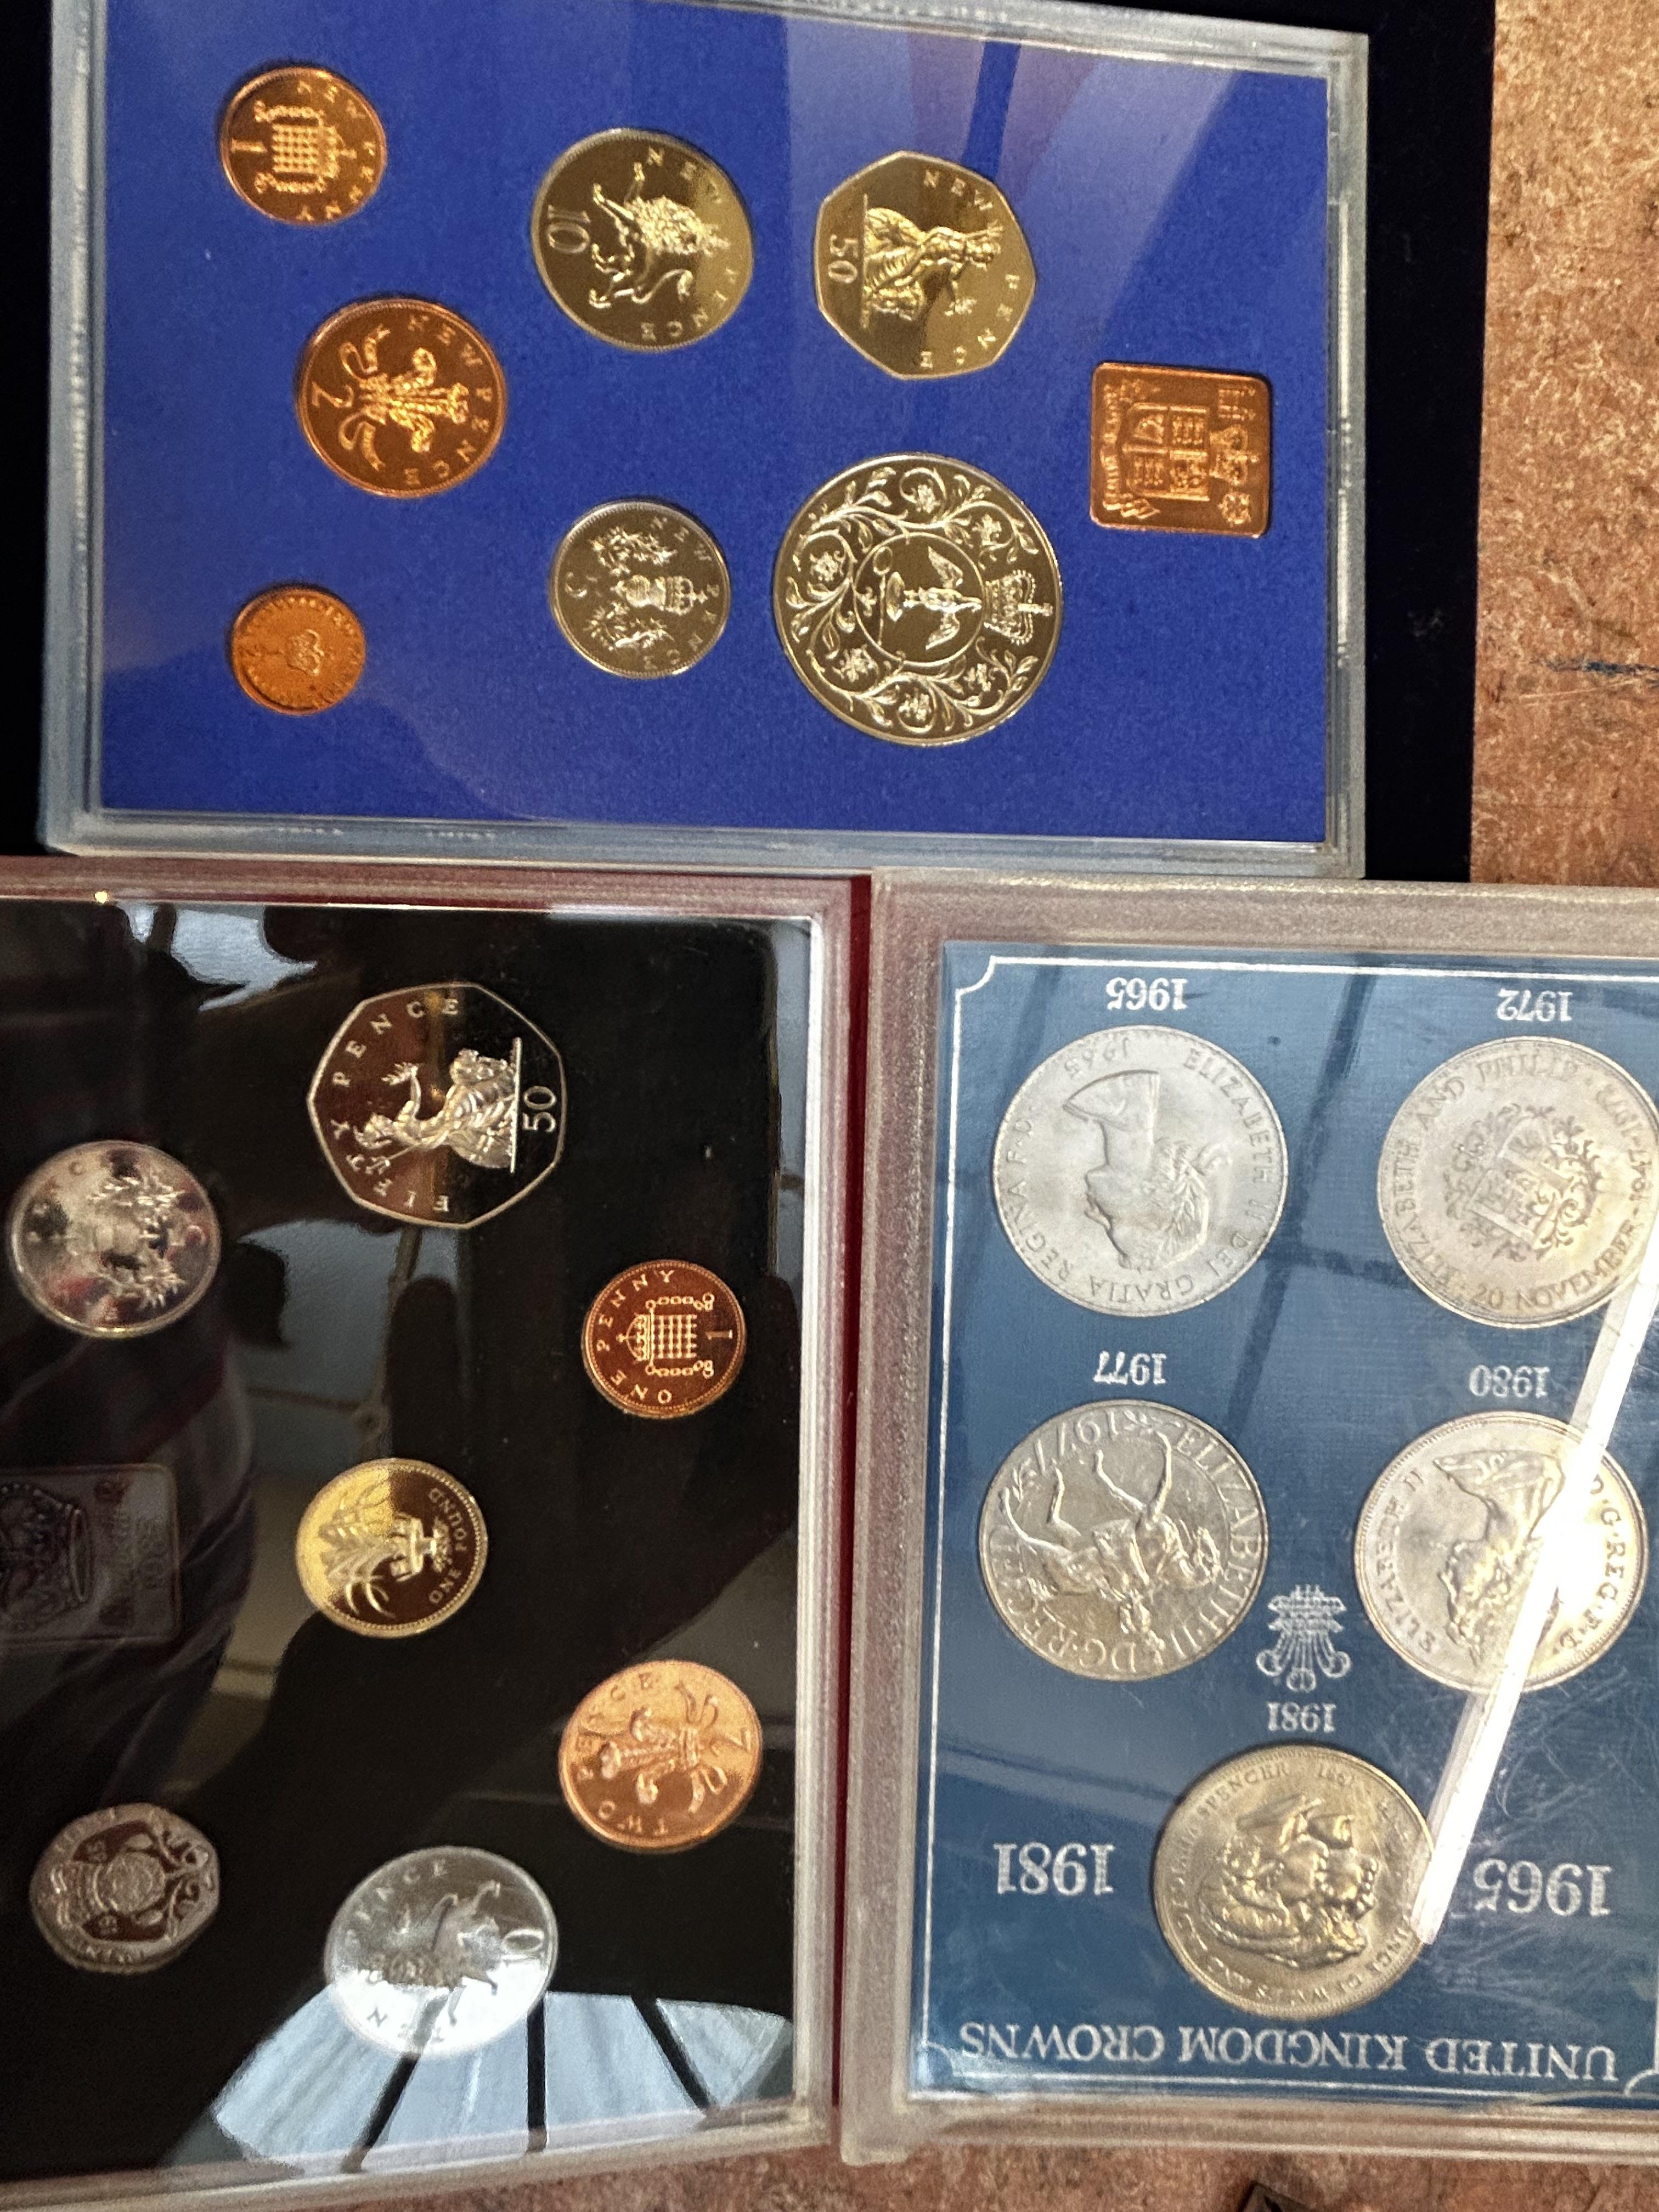 3x Mint coin collections